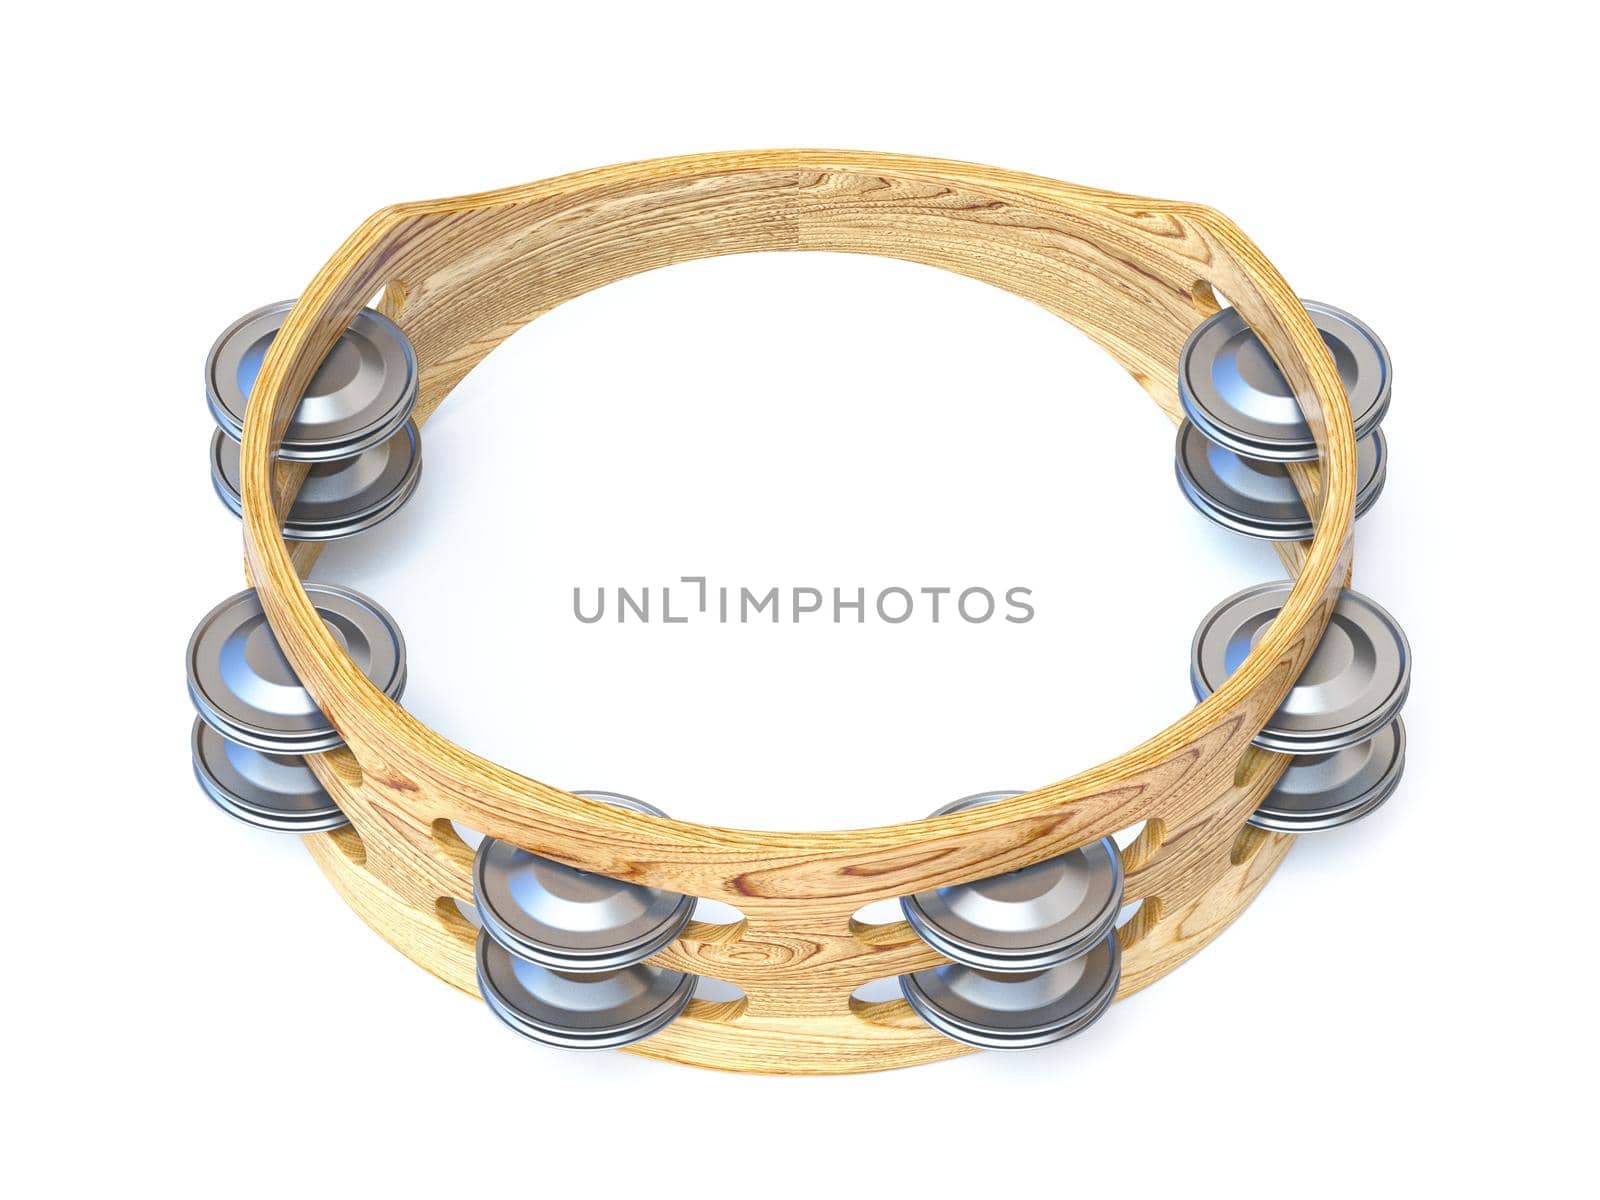 Wooden tambourine 3D render illustration isolated on white background